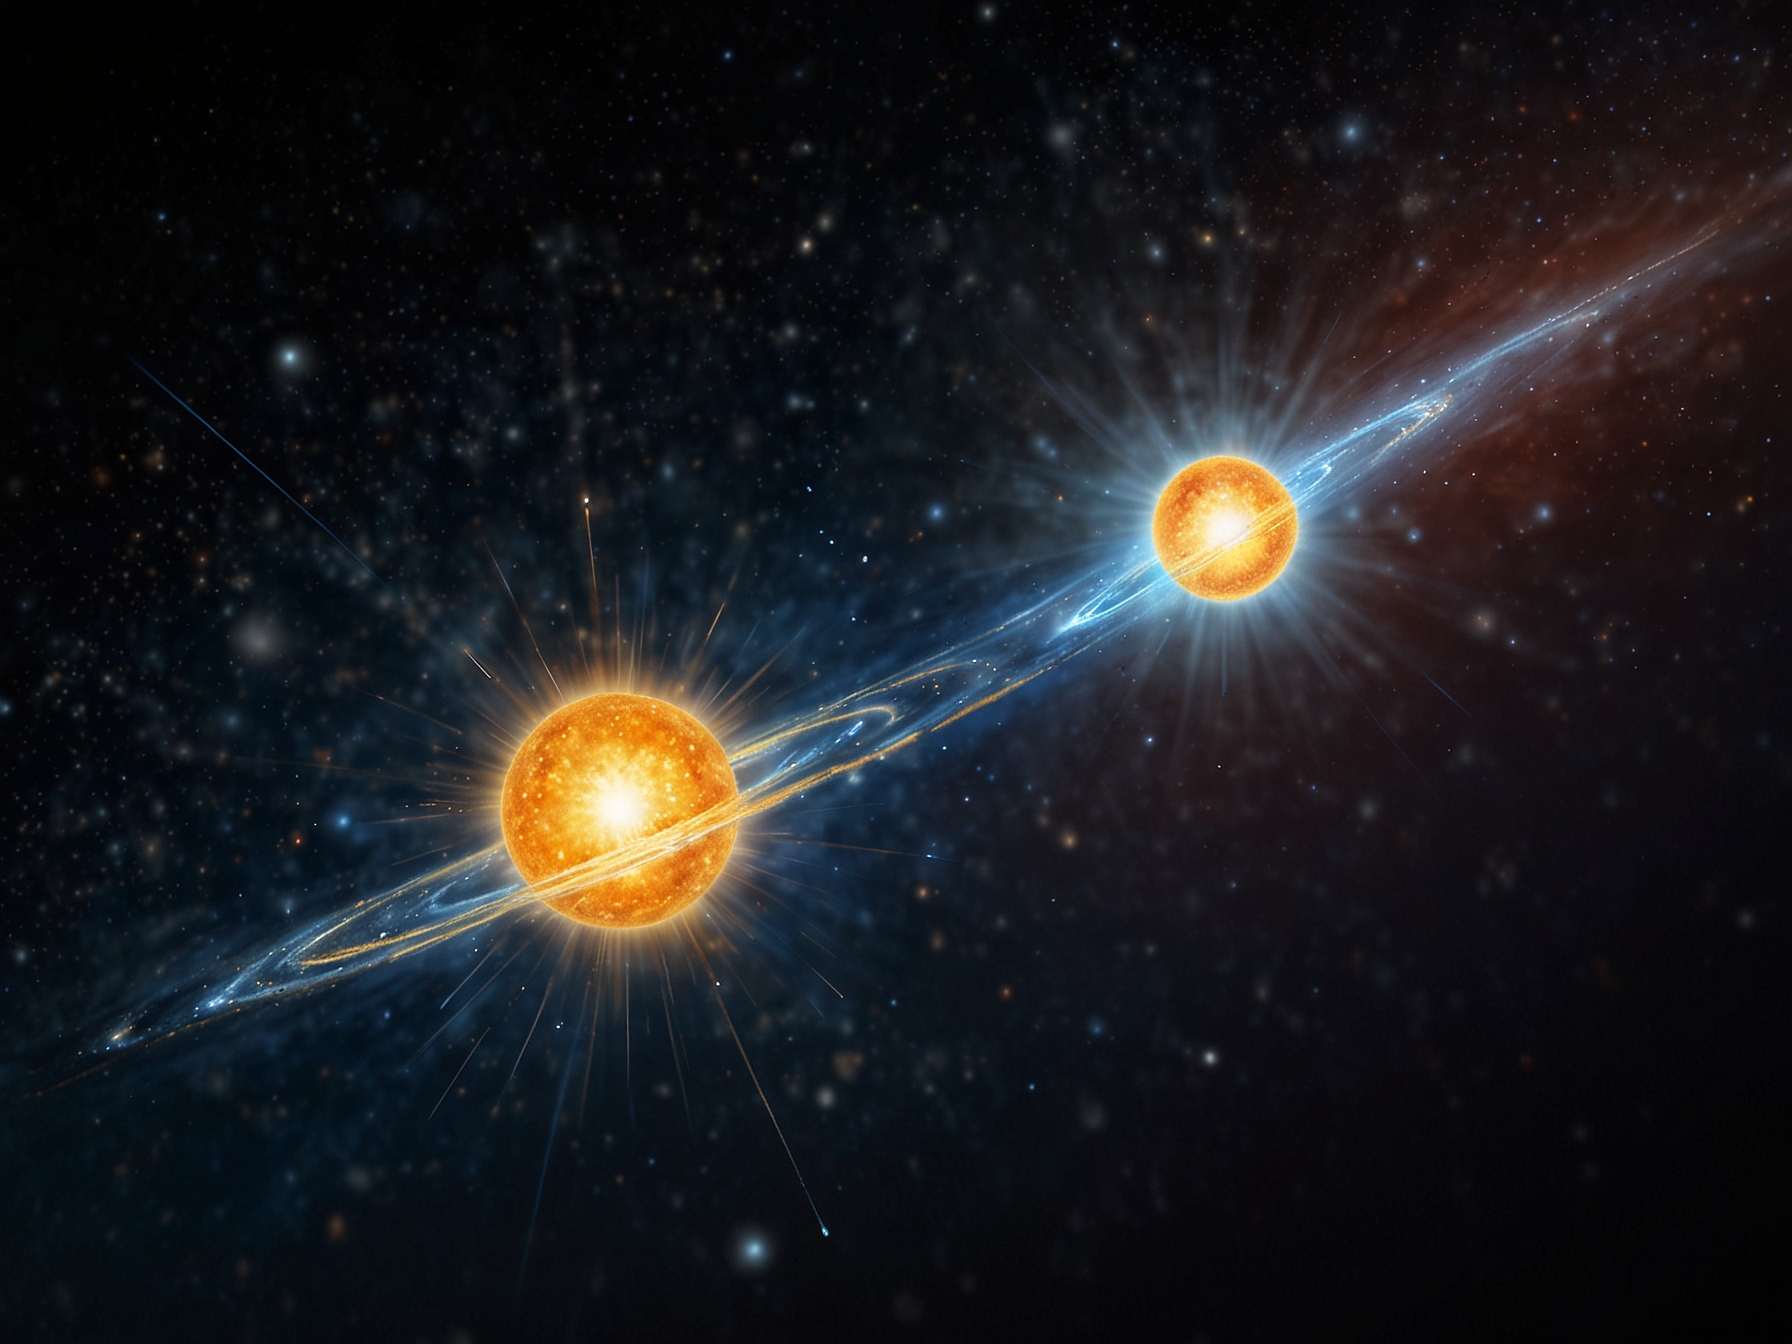 A graphic illustration of a neutron star cooling mechanism, showcasing the significant deviation of three young neutron stars' temperatures from predicted models.